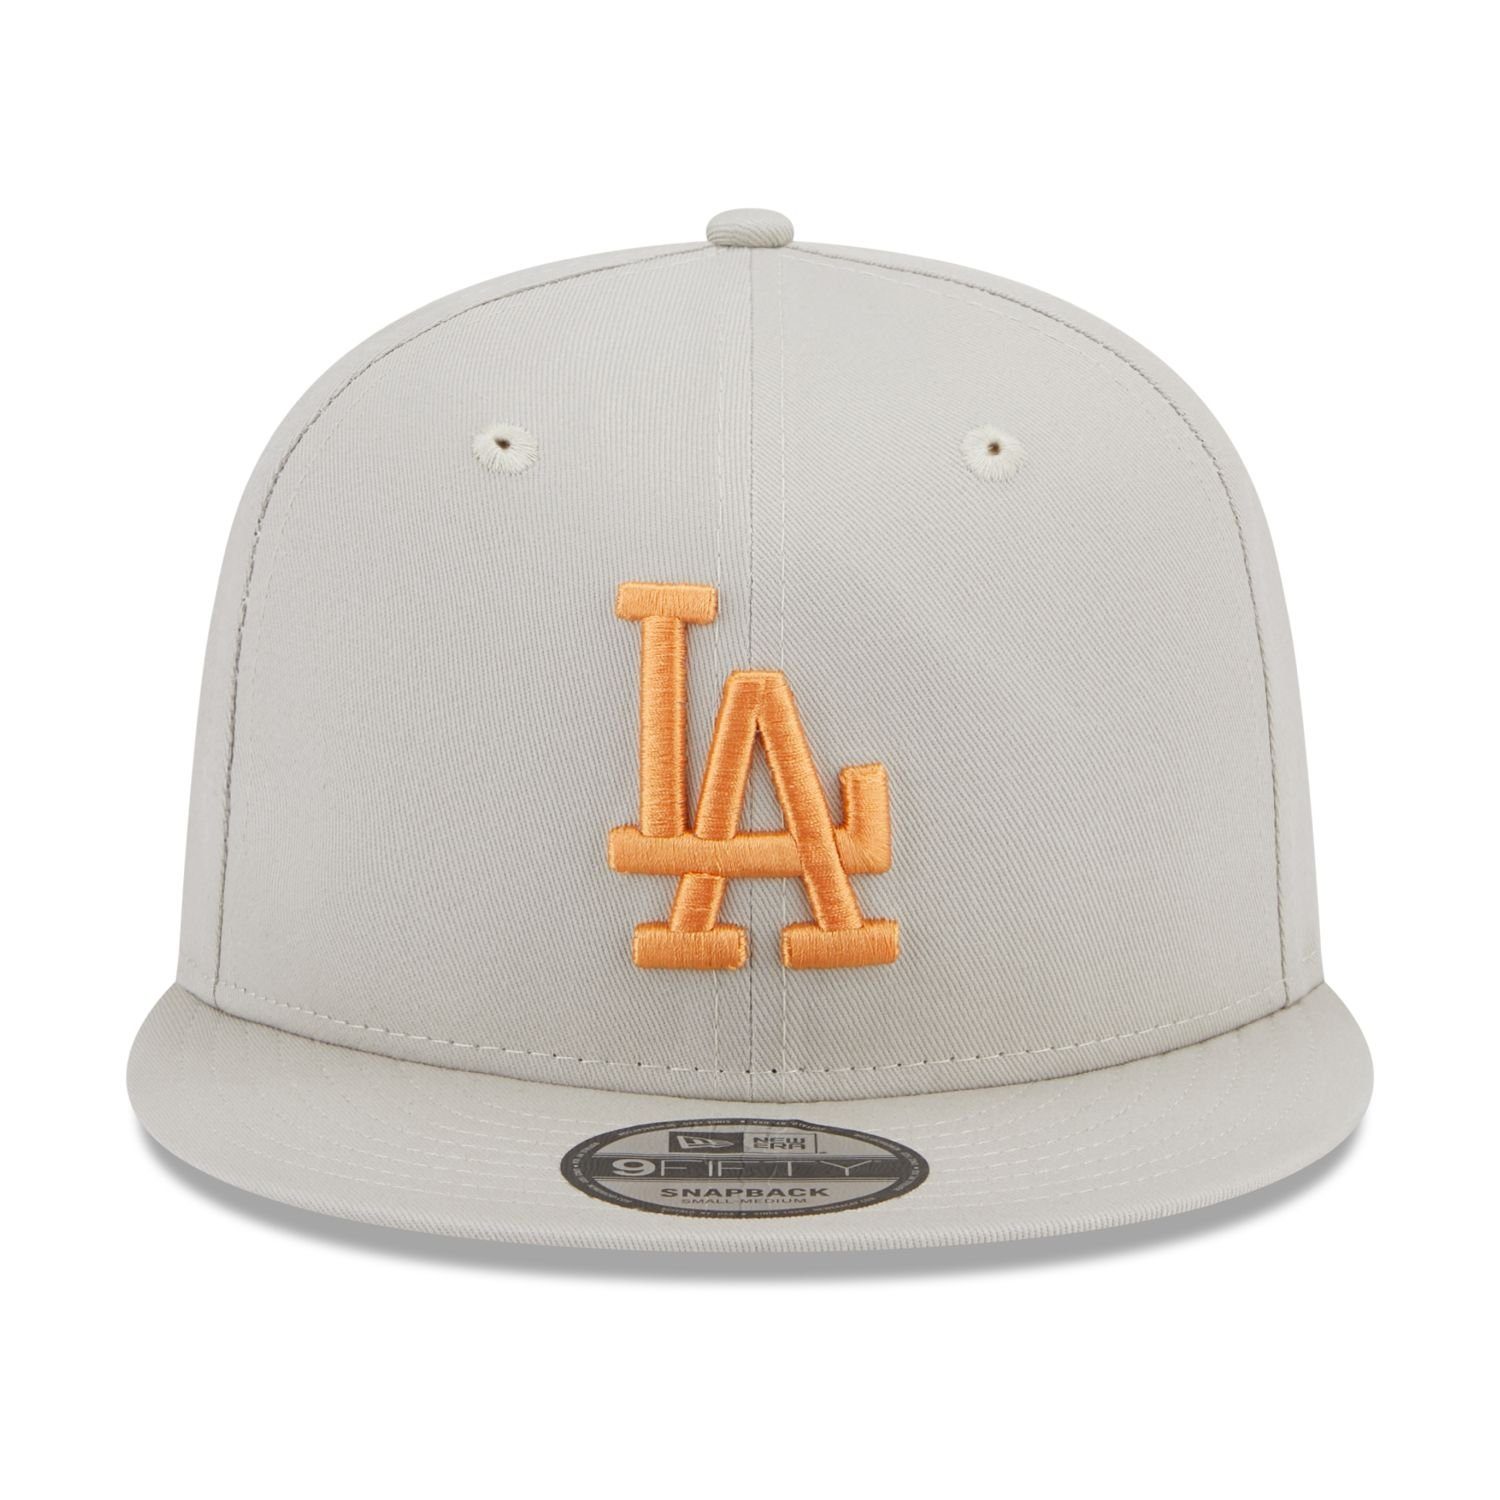 SIDEPATCH New Angeles Cap 9Fifty Los Era Snapback Dodgers